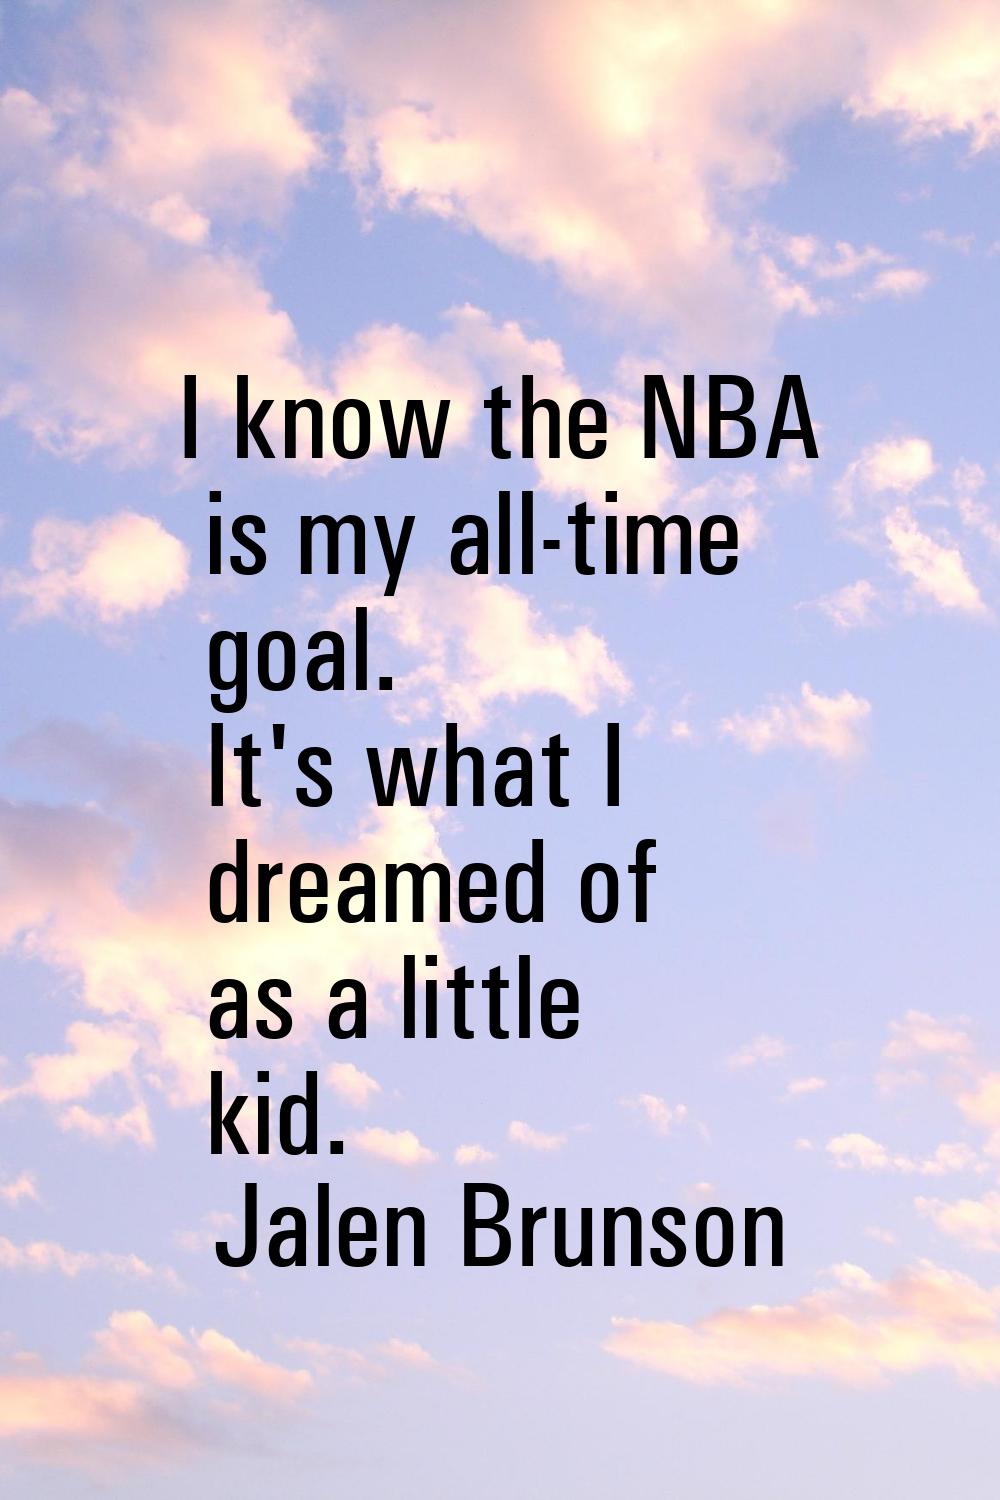 I know the NBA is my all-time goal. It's what I dreamed of as a little kid.